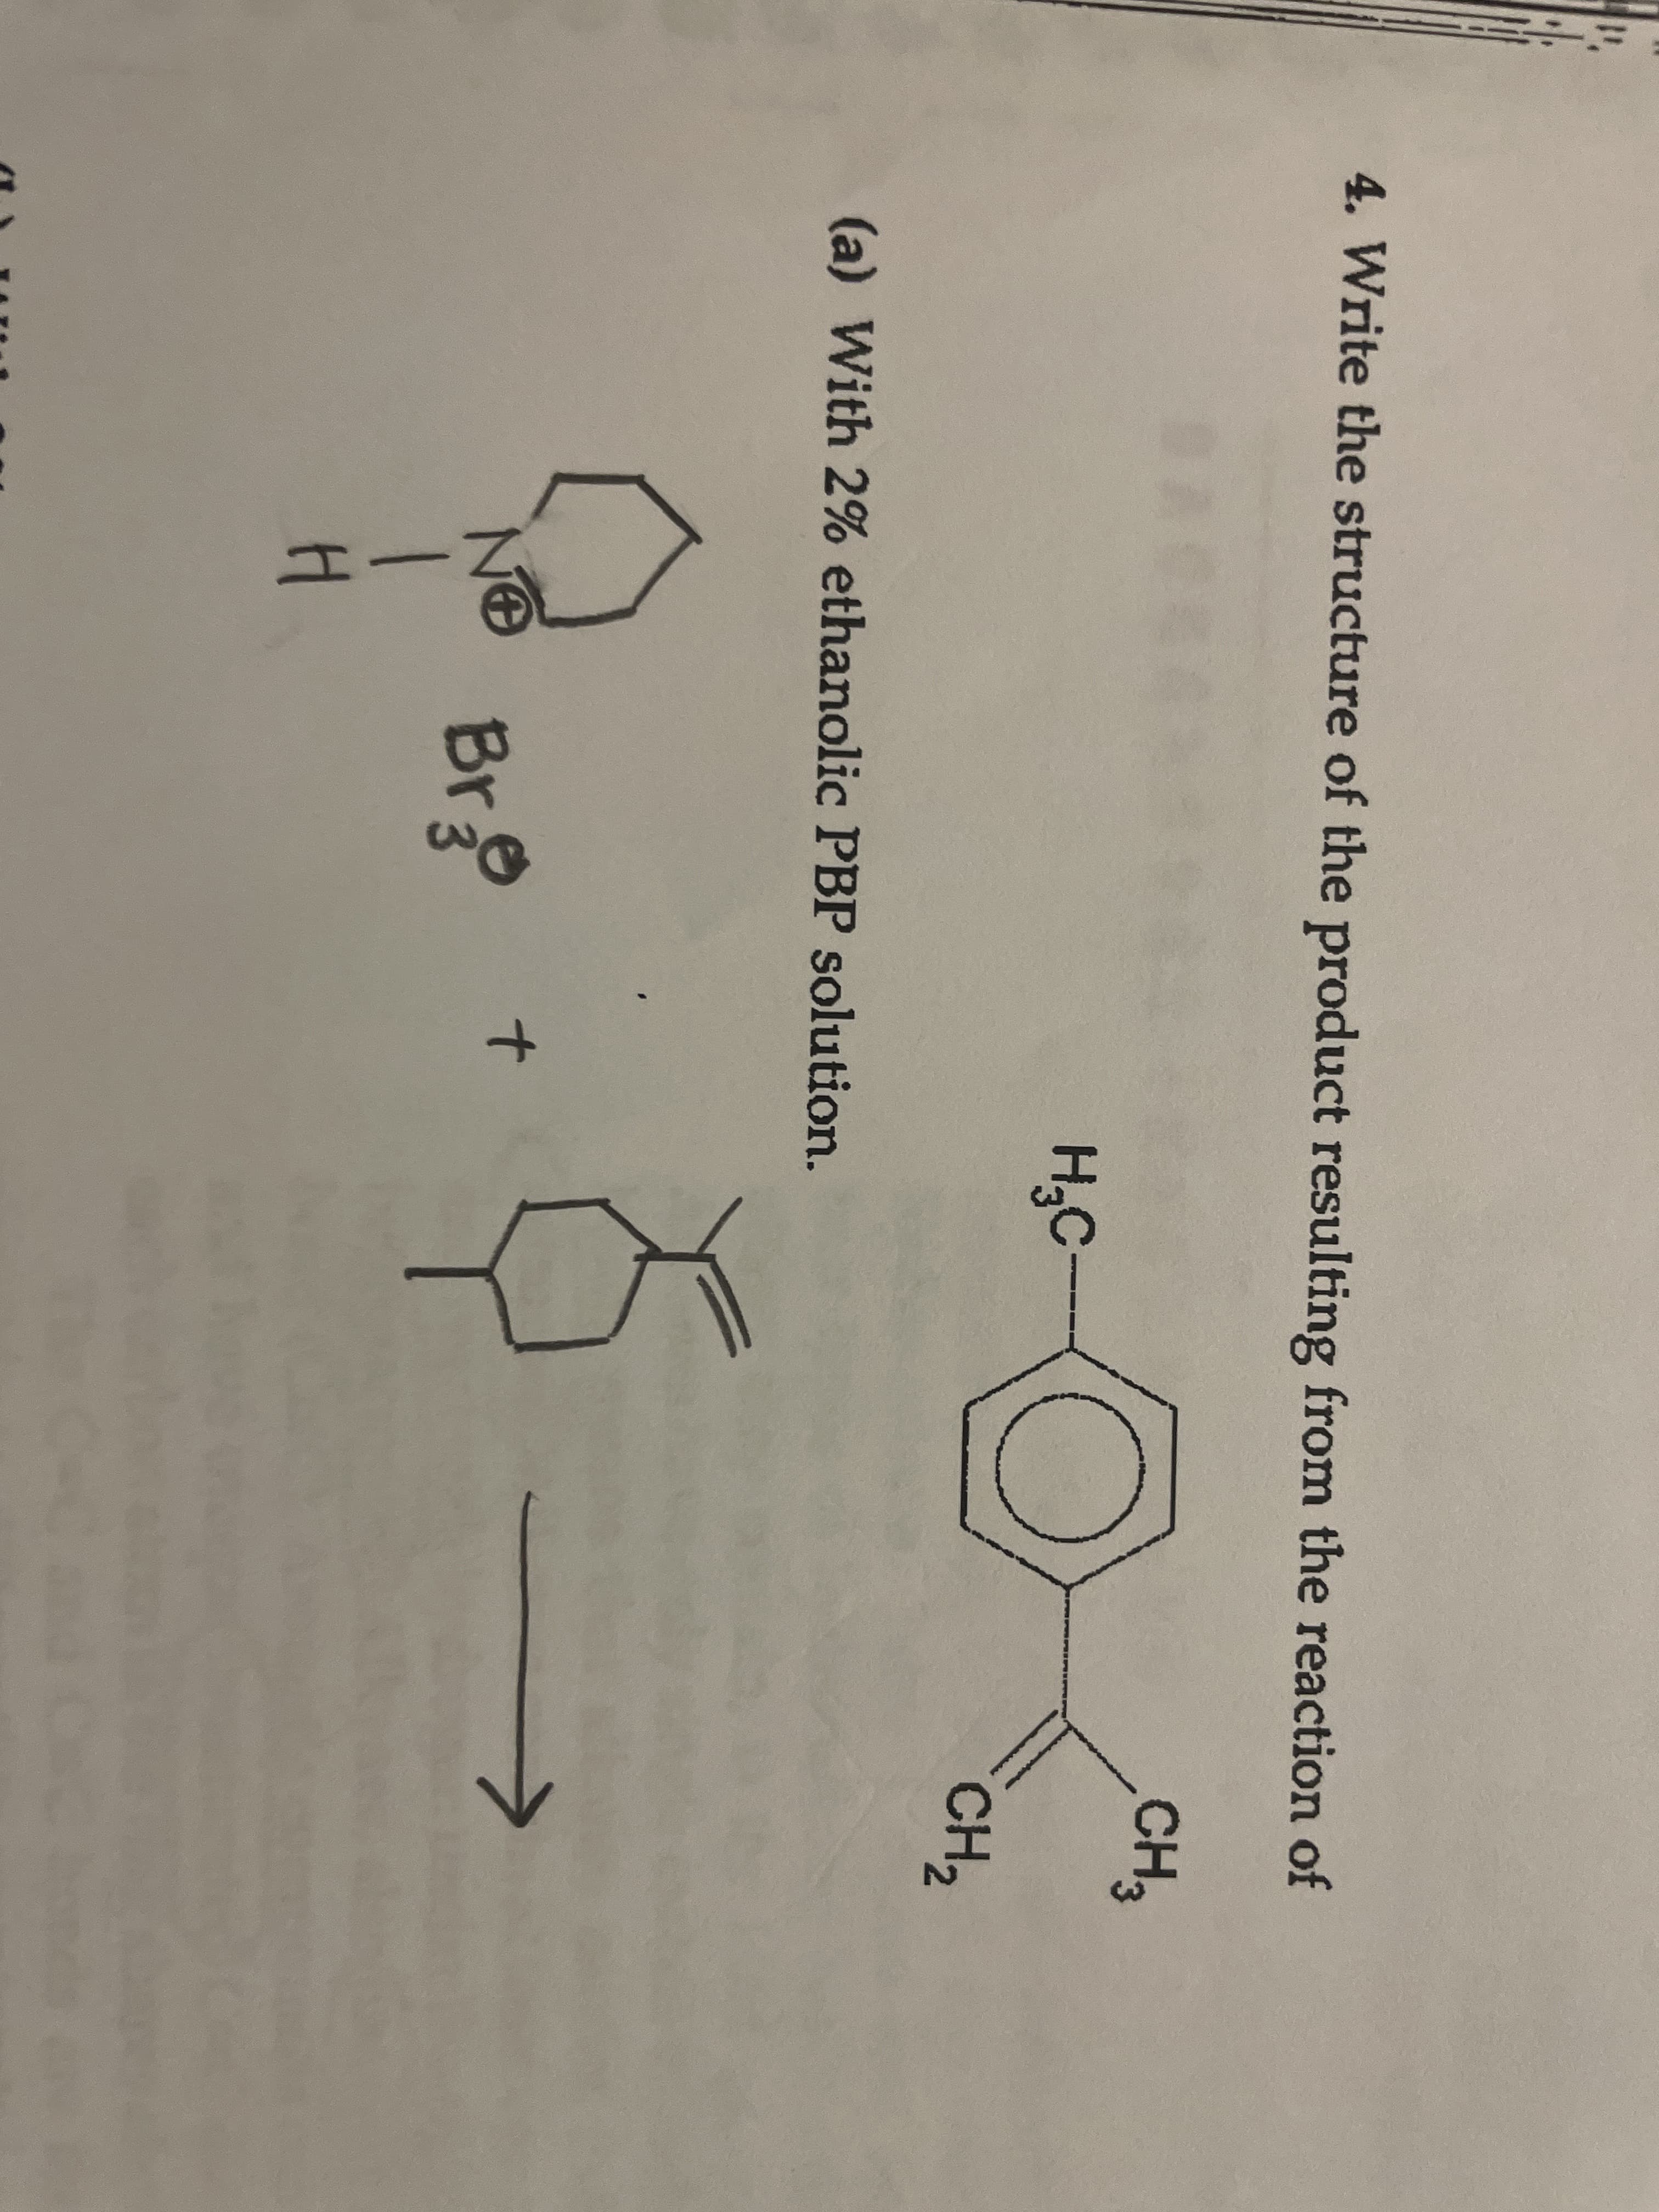 4. Write the structure of the product resulting from the reaction of
CH3
H,C-
CH2
